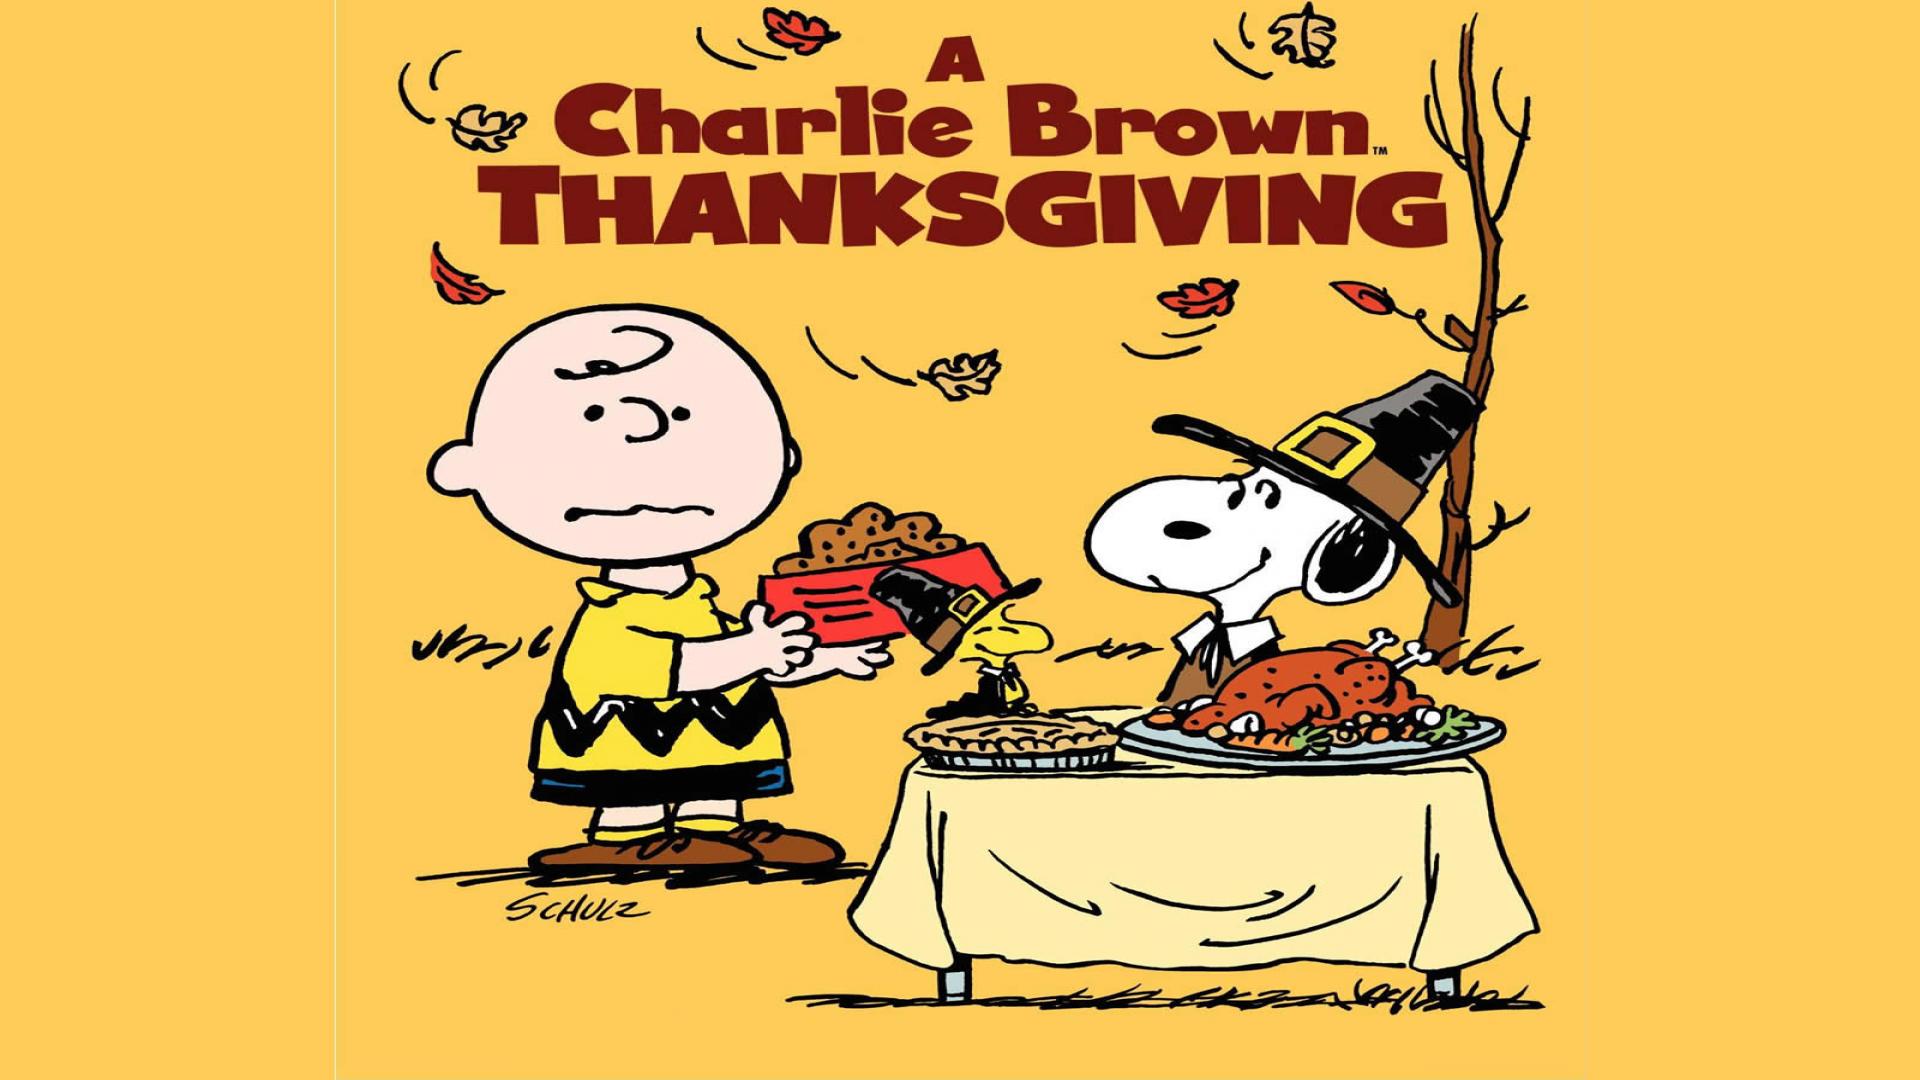 Charlie Brown Peanuts Thanksgiving Wallpaper Snoopy